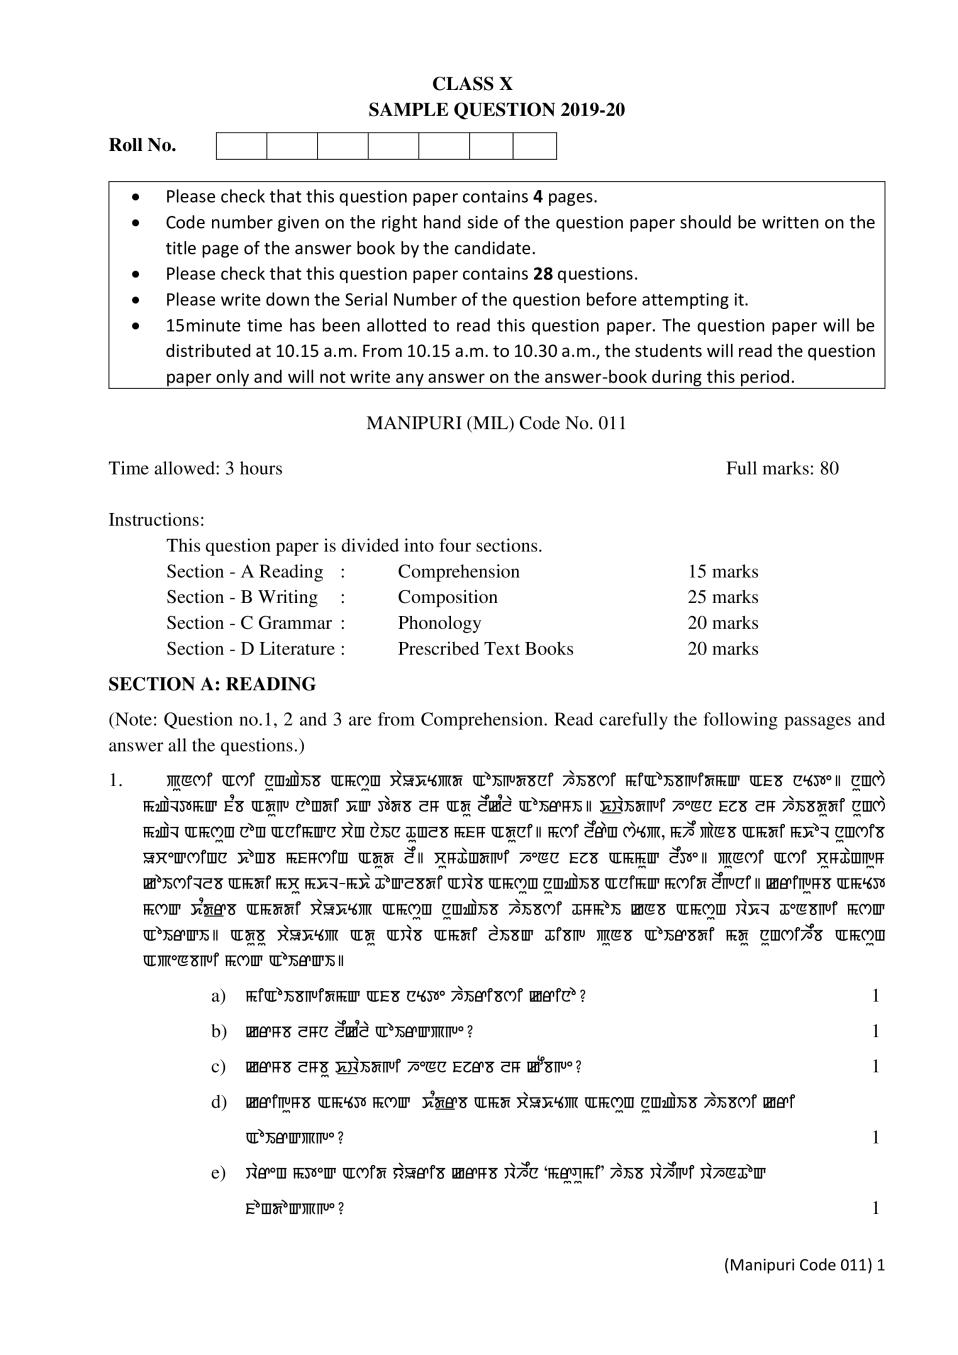 CBSE Class 10 Sample Paper 2020 for Manipuri - Page 1